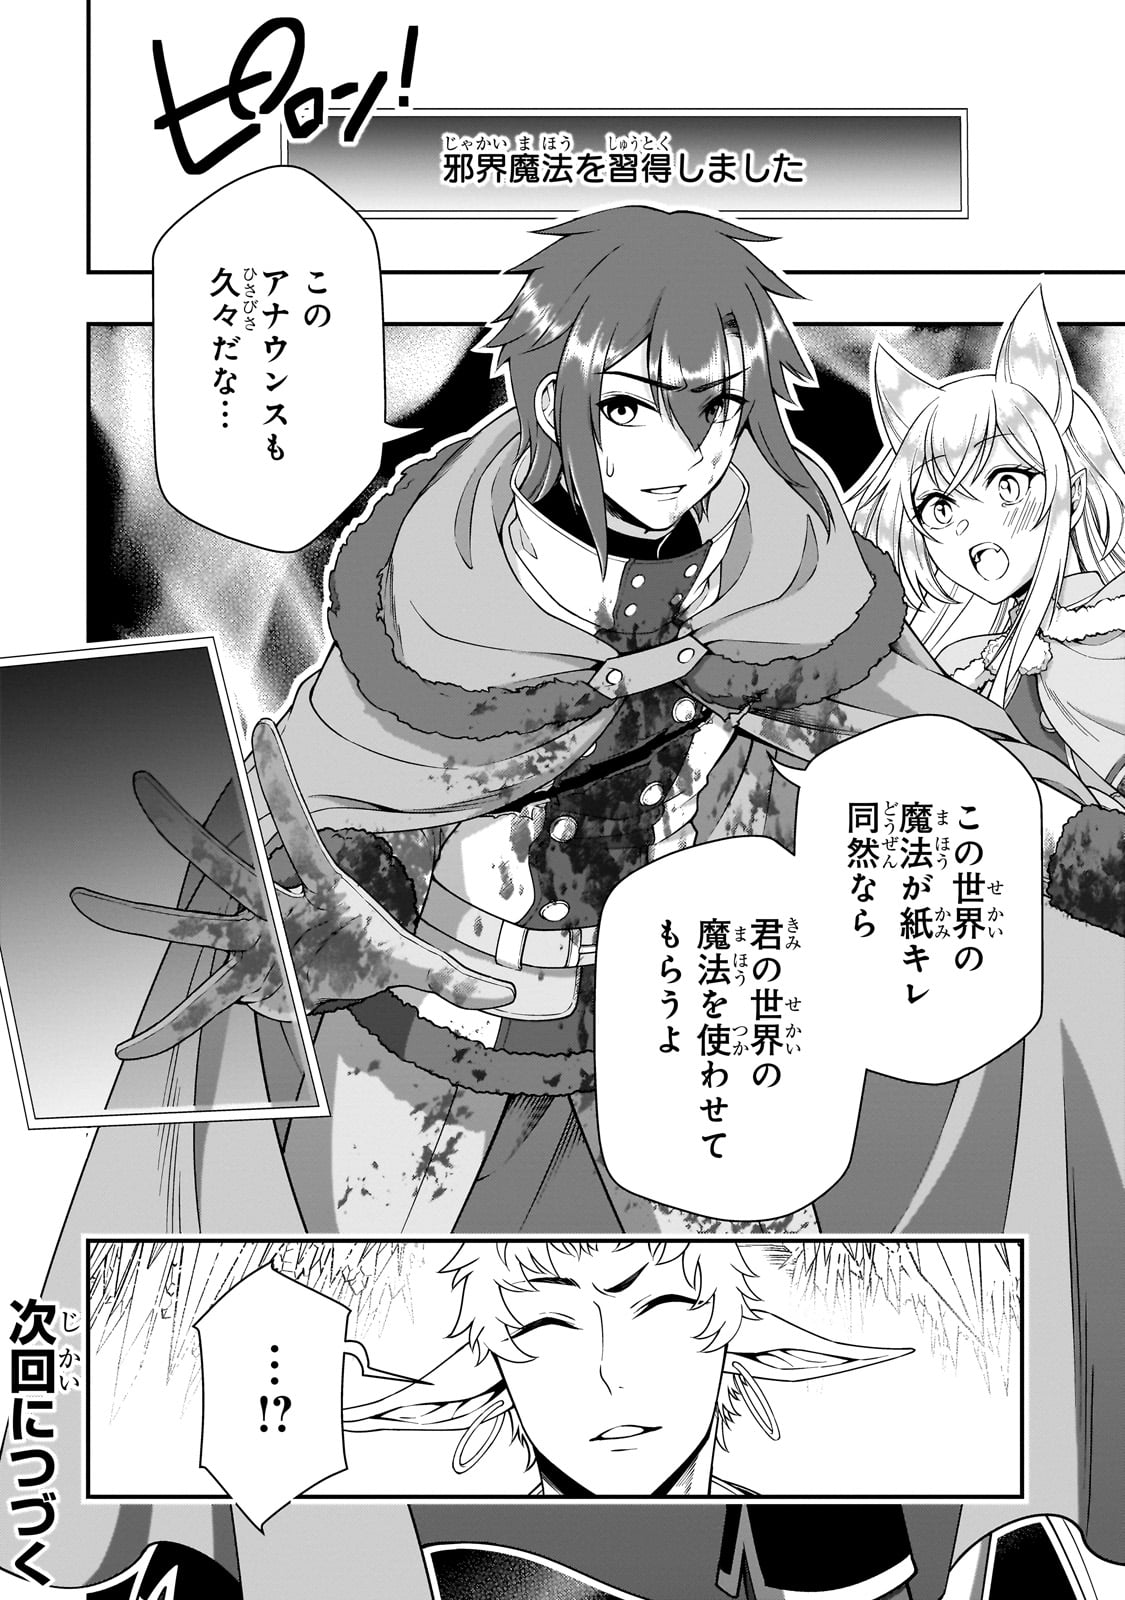 Ex-Hero Candidates, Who Turned Out To Be A Cheat From Lv2, Laid-back Life In Another World - Chapter 49 - Page 30